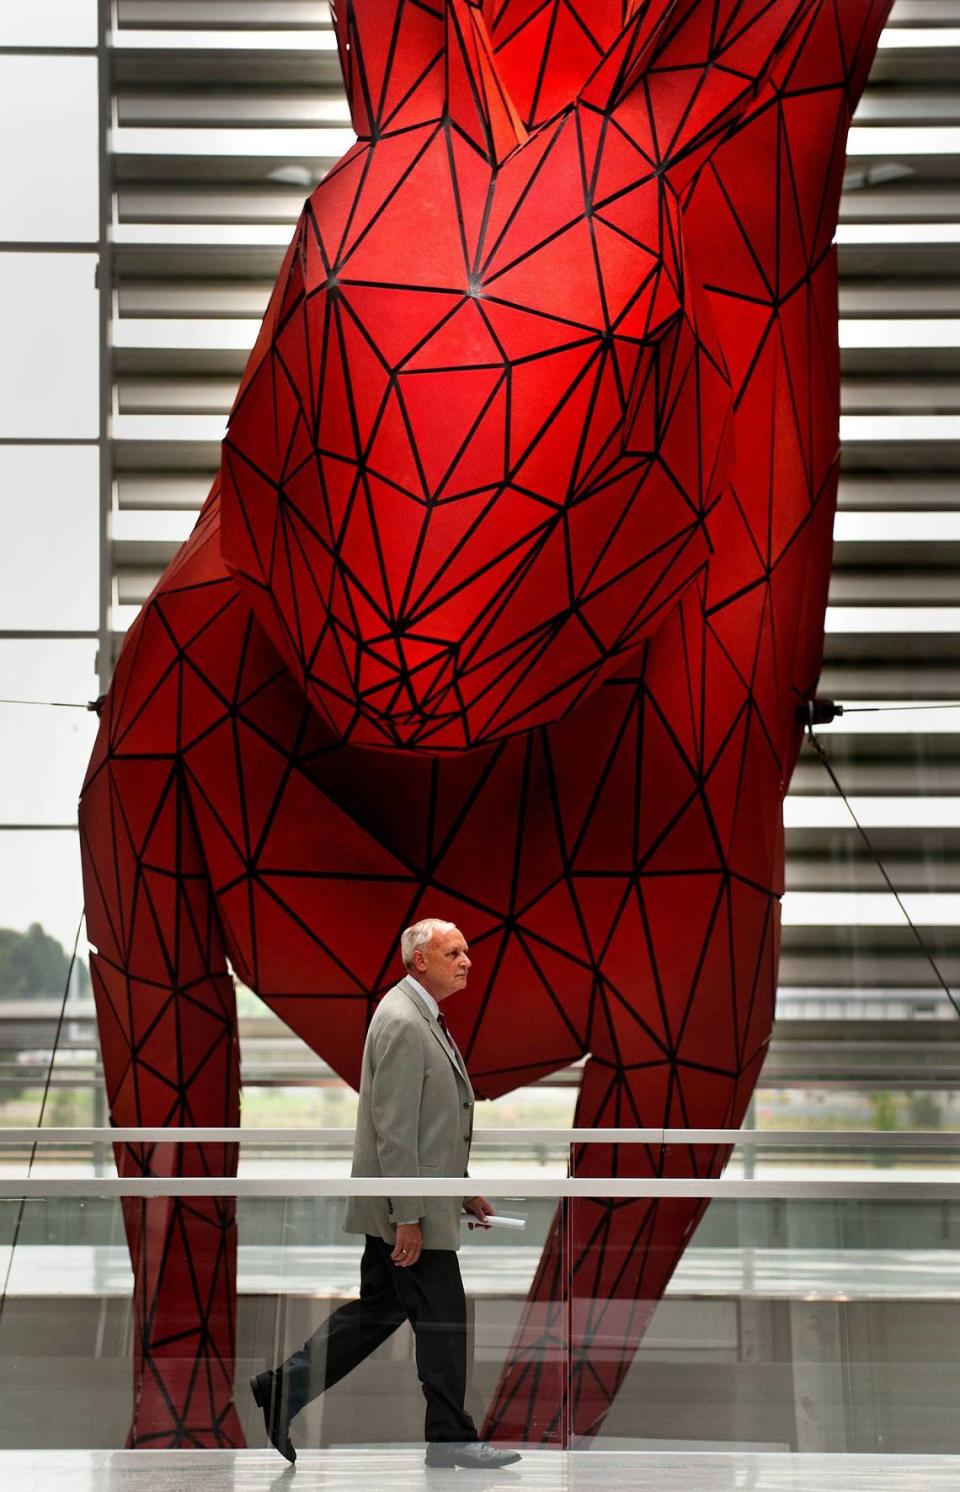 Hardy Acree, Sacramento County airports director, passes artist Lawrence Argent’s “Red Rabbit” sculpture, which seems to have leaped into the building from the fields outside.